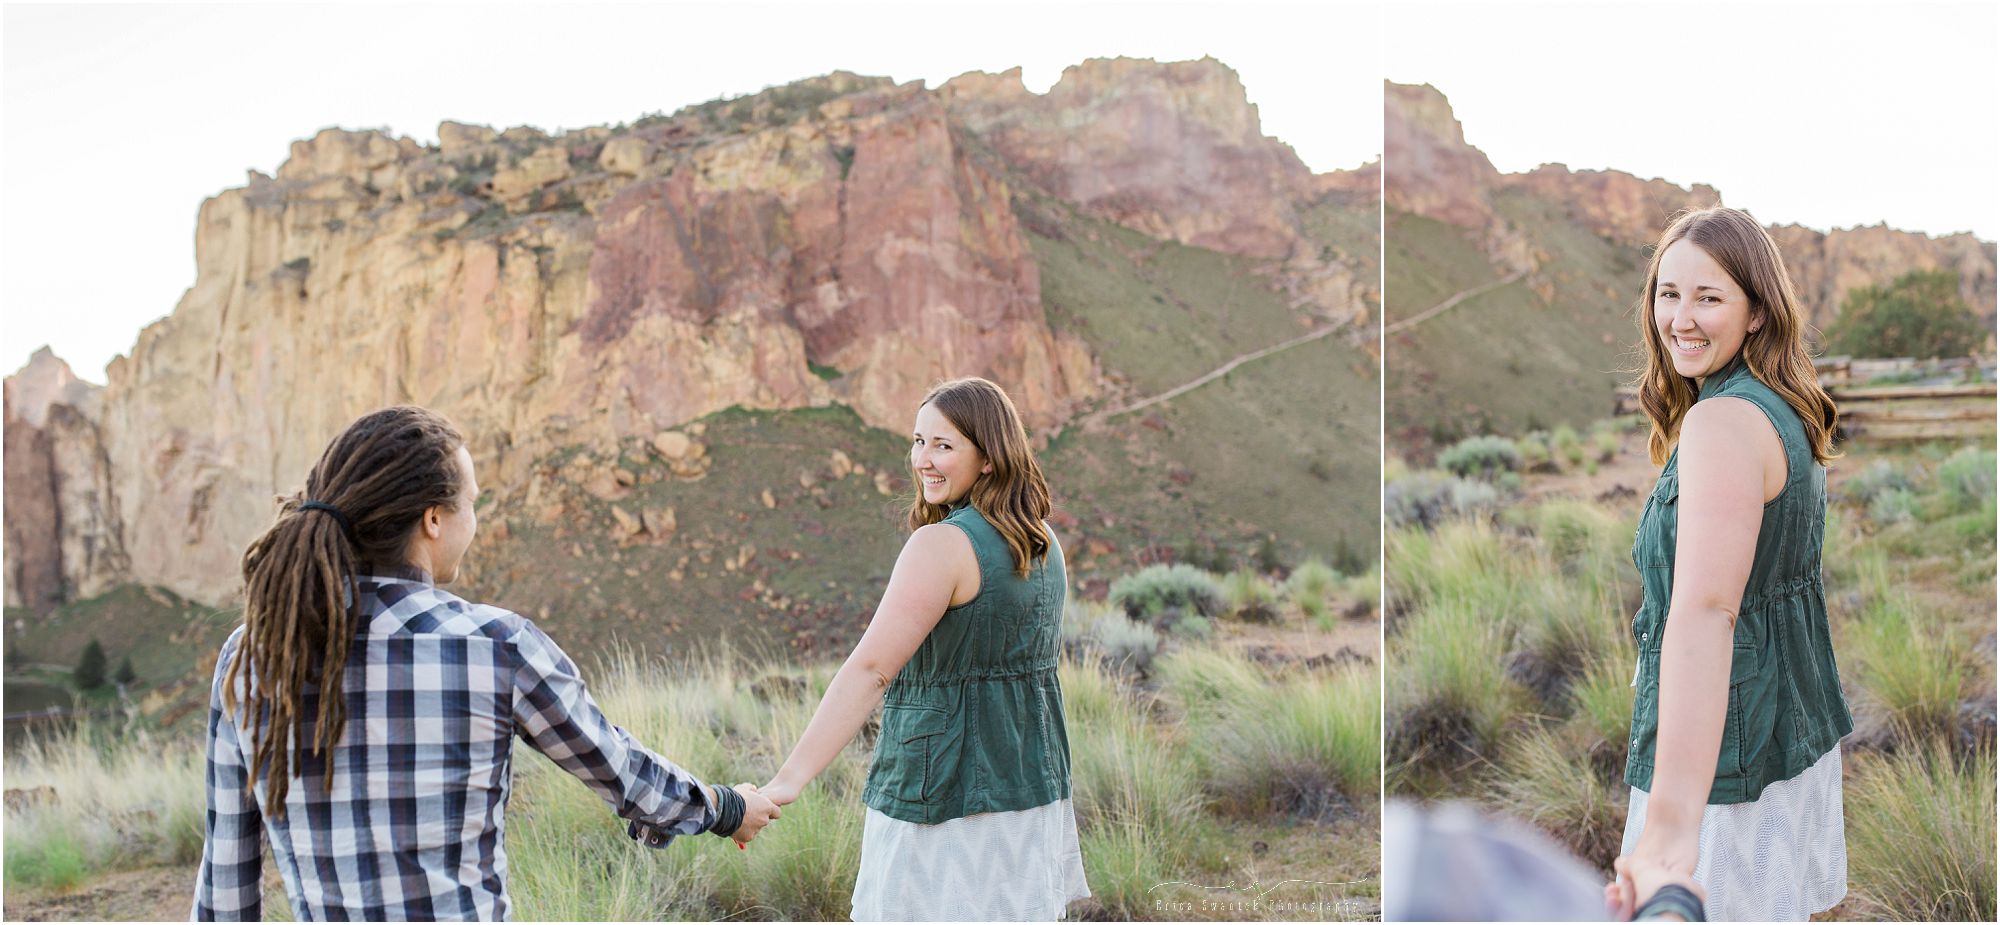 An outdoor adventure inspired Smith Rock Engagement Session by Bend wedding photographer Erica Swantek. 